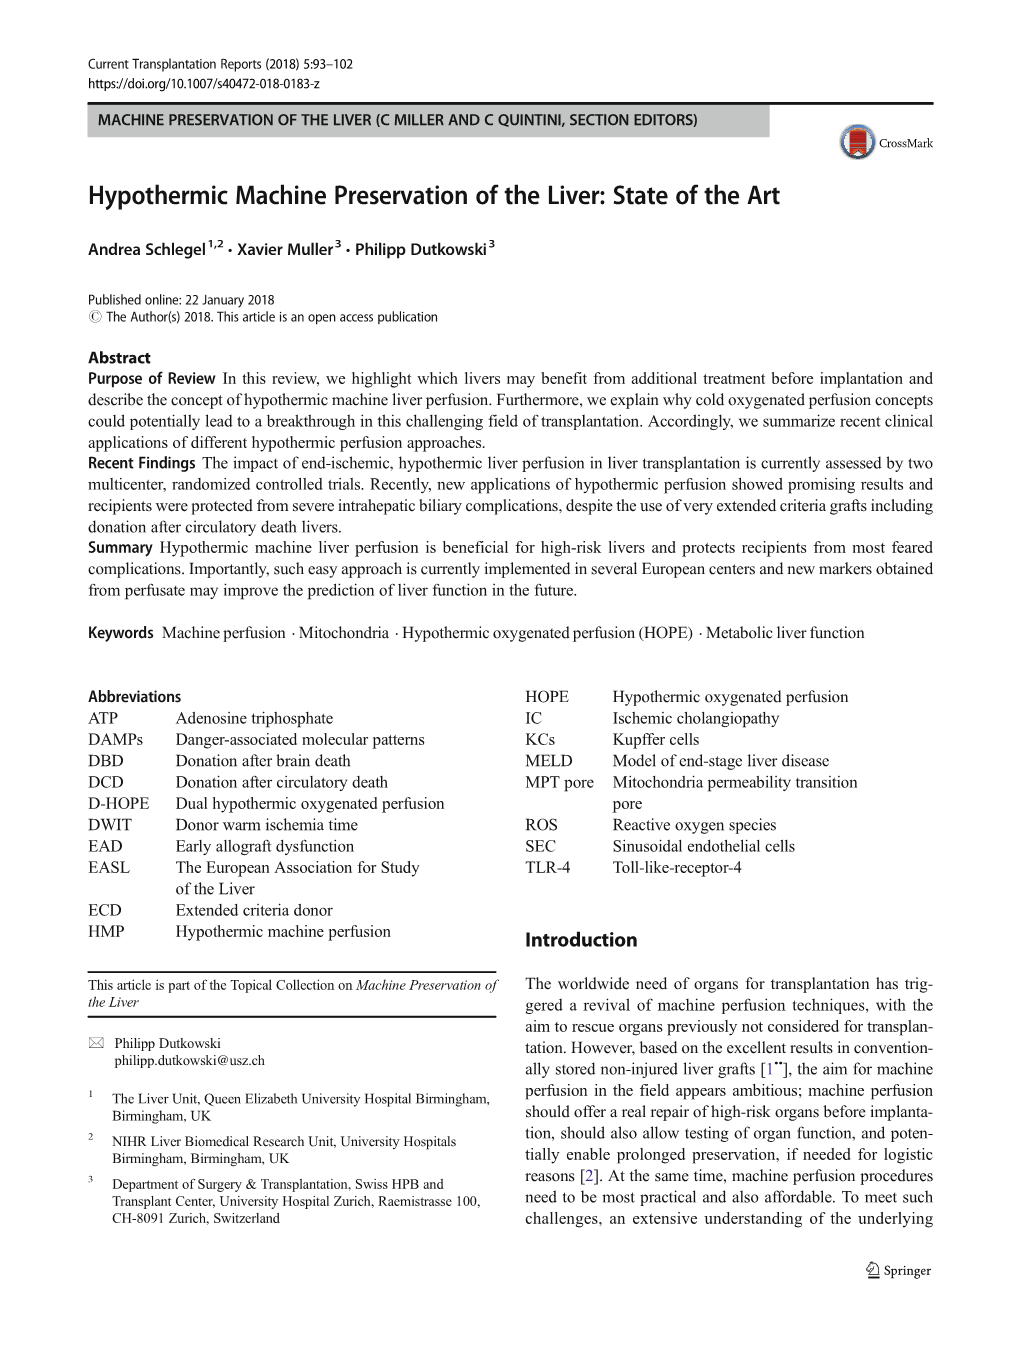 Hypothermic Machine Preservation of the Liver: State of the Art